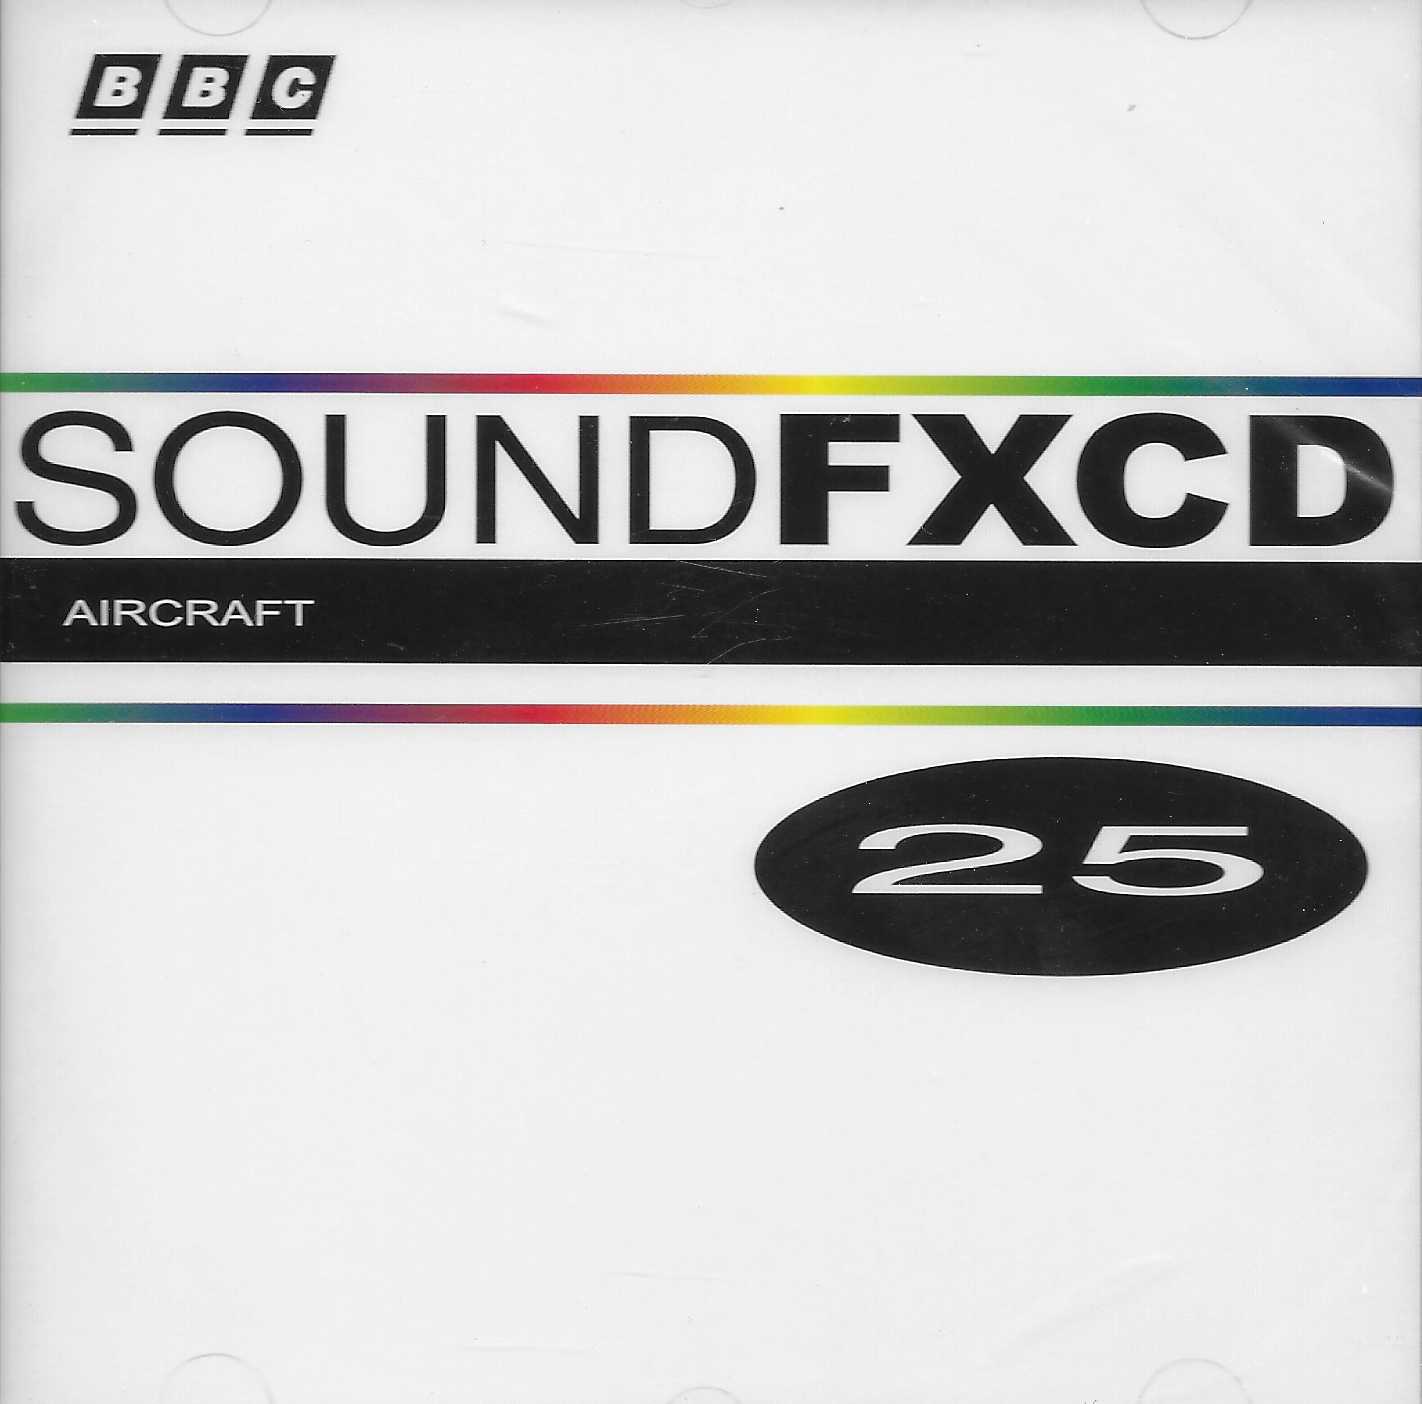 Picture of BBCCD SFX025 Aircraft by artist Various from the BBC cds - Records and Tapes library